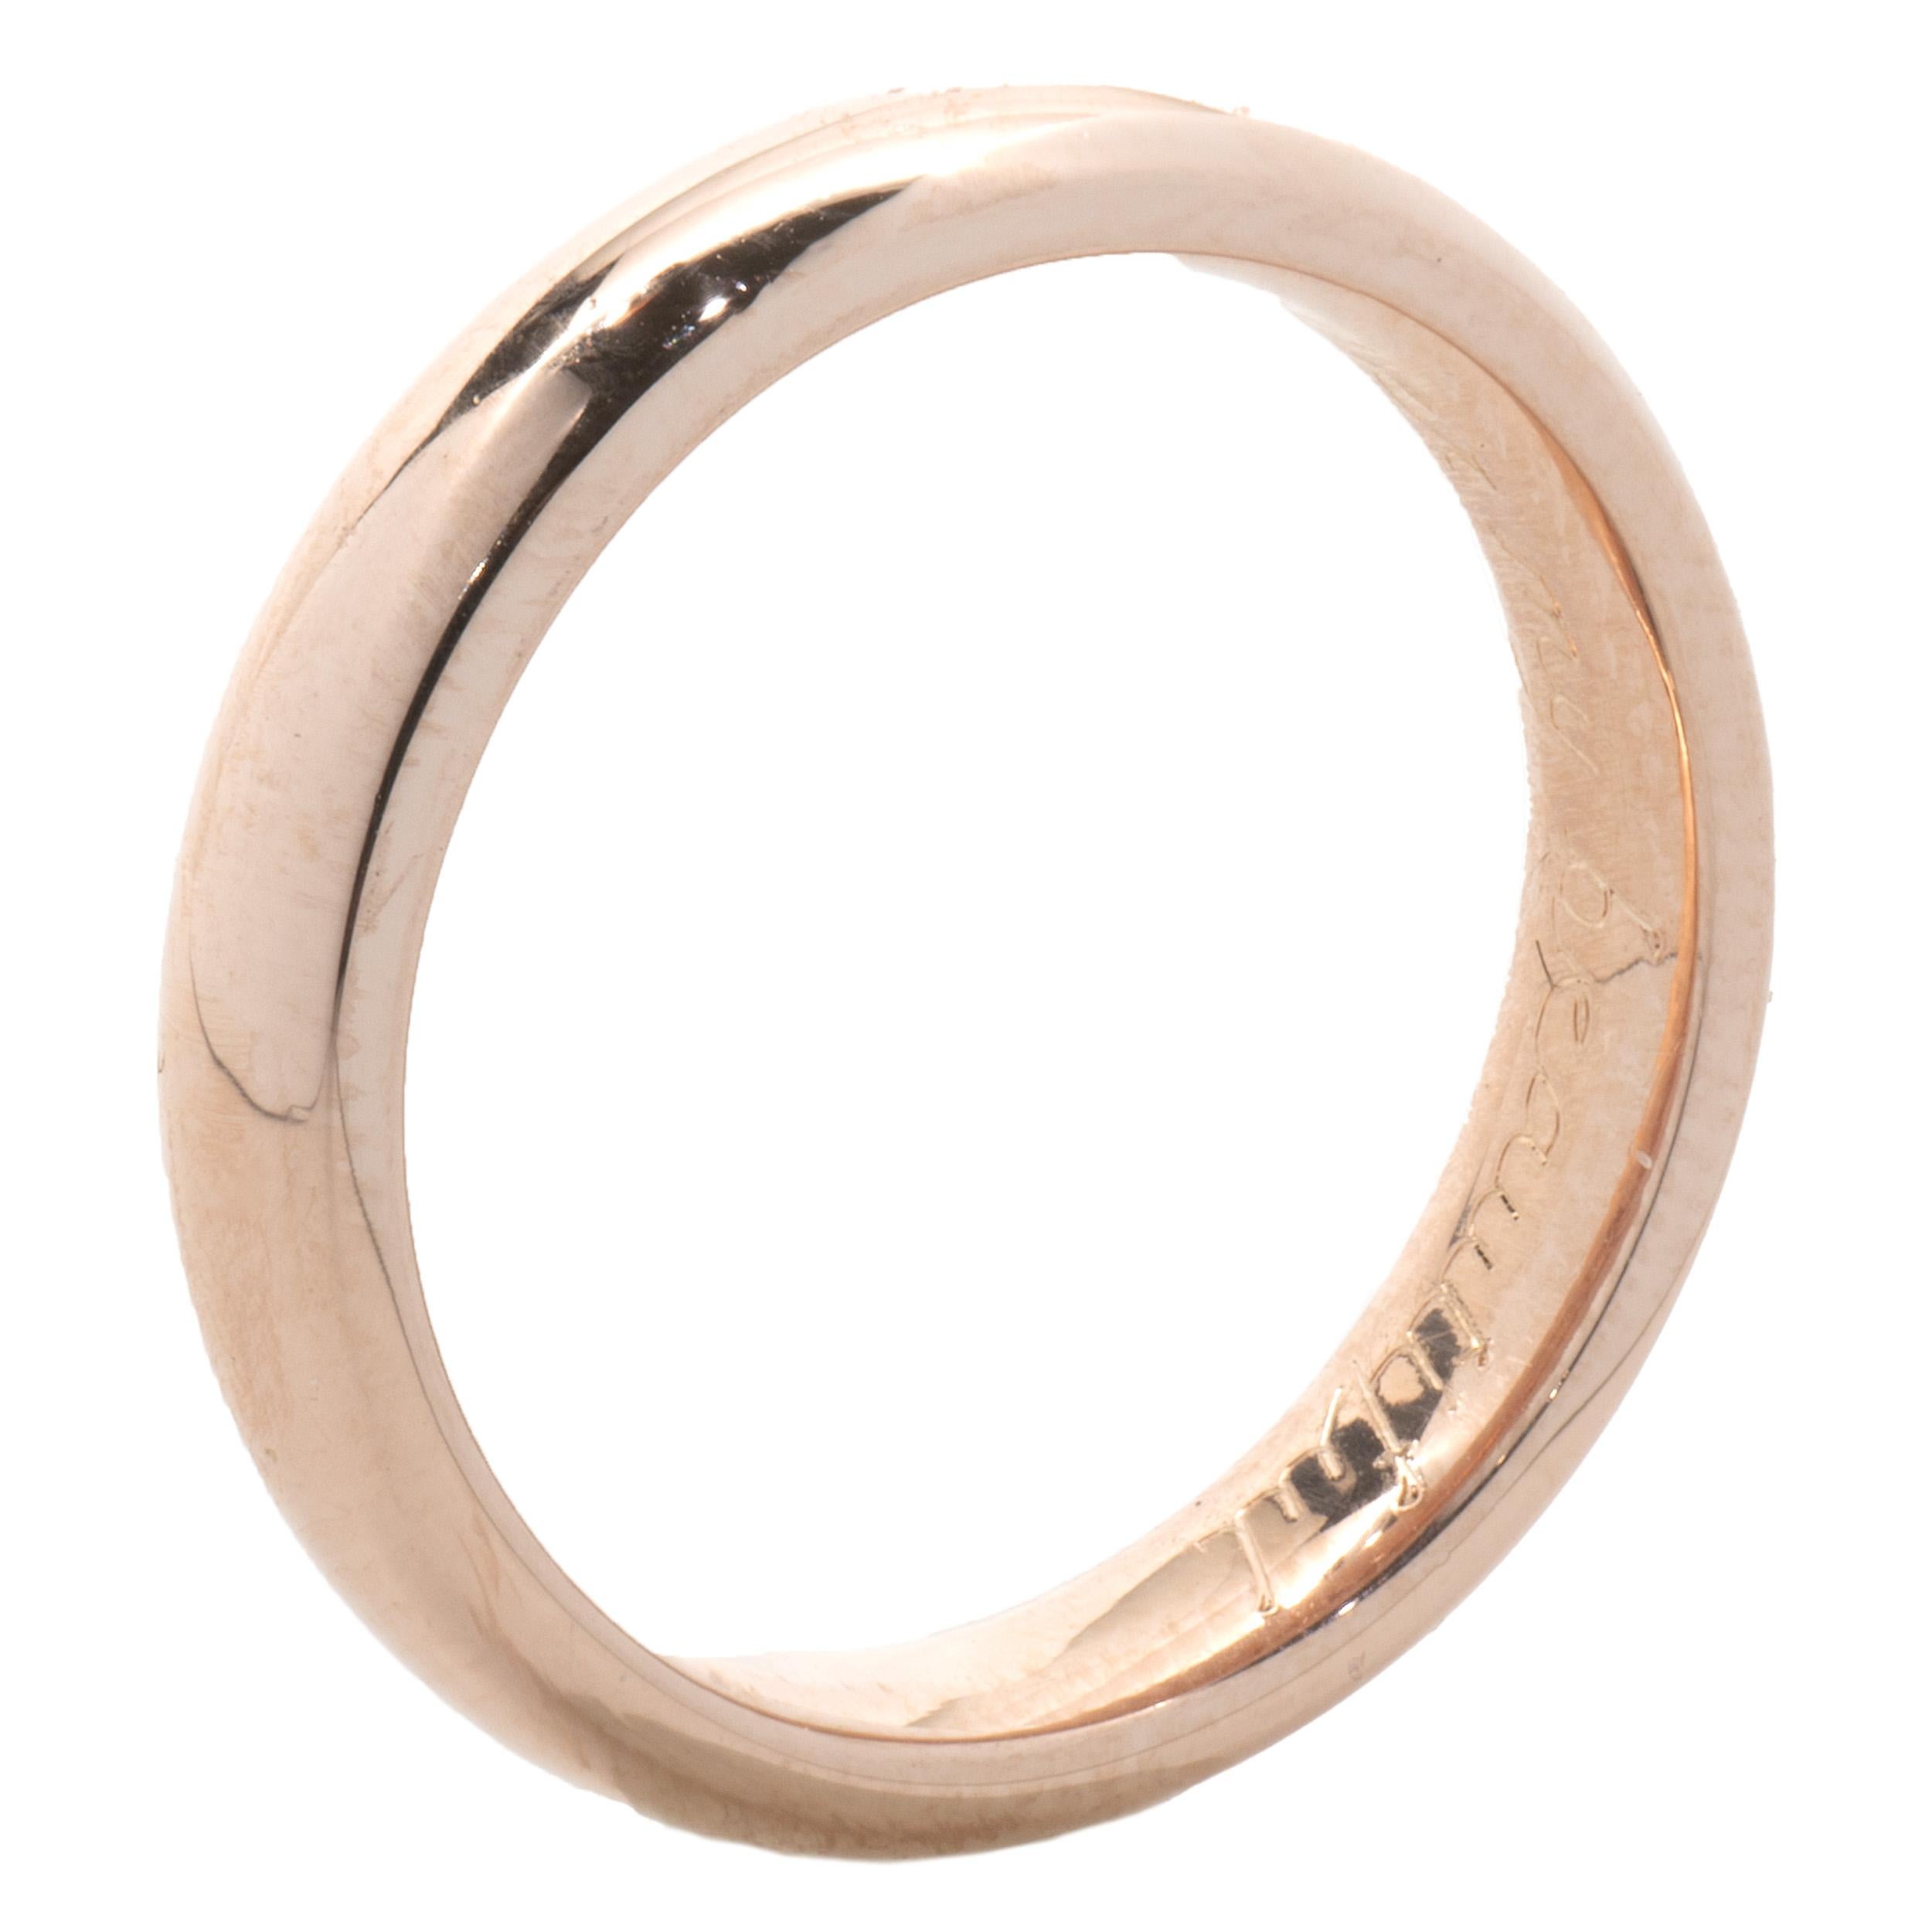 Designer: custom
Material: 14K rose gold
Dimensions: the ring measures 4mm wide
Weight:  5.12 grams
Ring Size: 6 (Please allow up to 2 additional business days for sizing requests) 